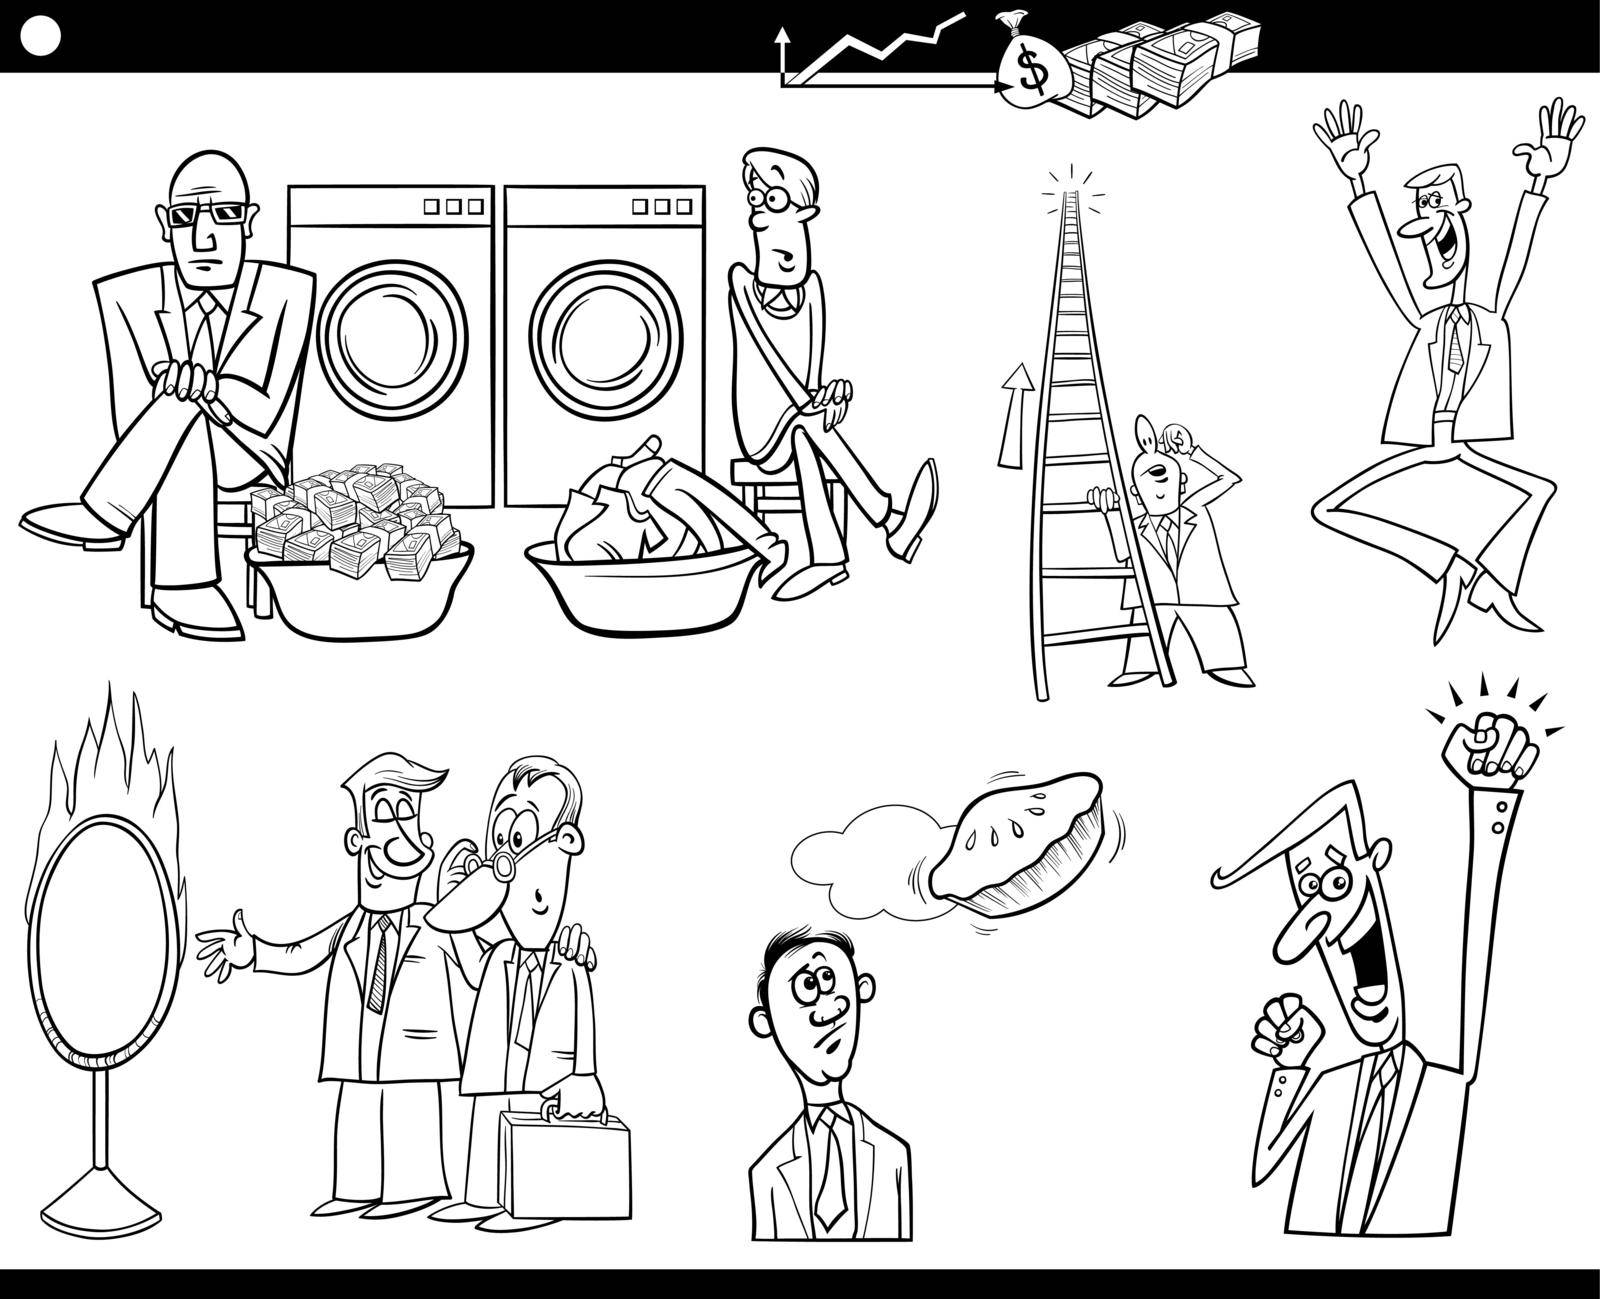 Black and white Cartoon illustration of business concepts with comic people and businessmen characters set